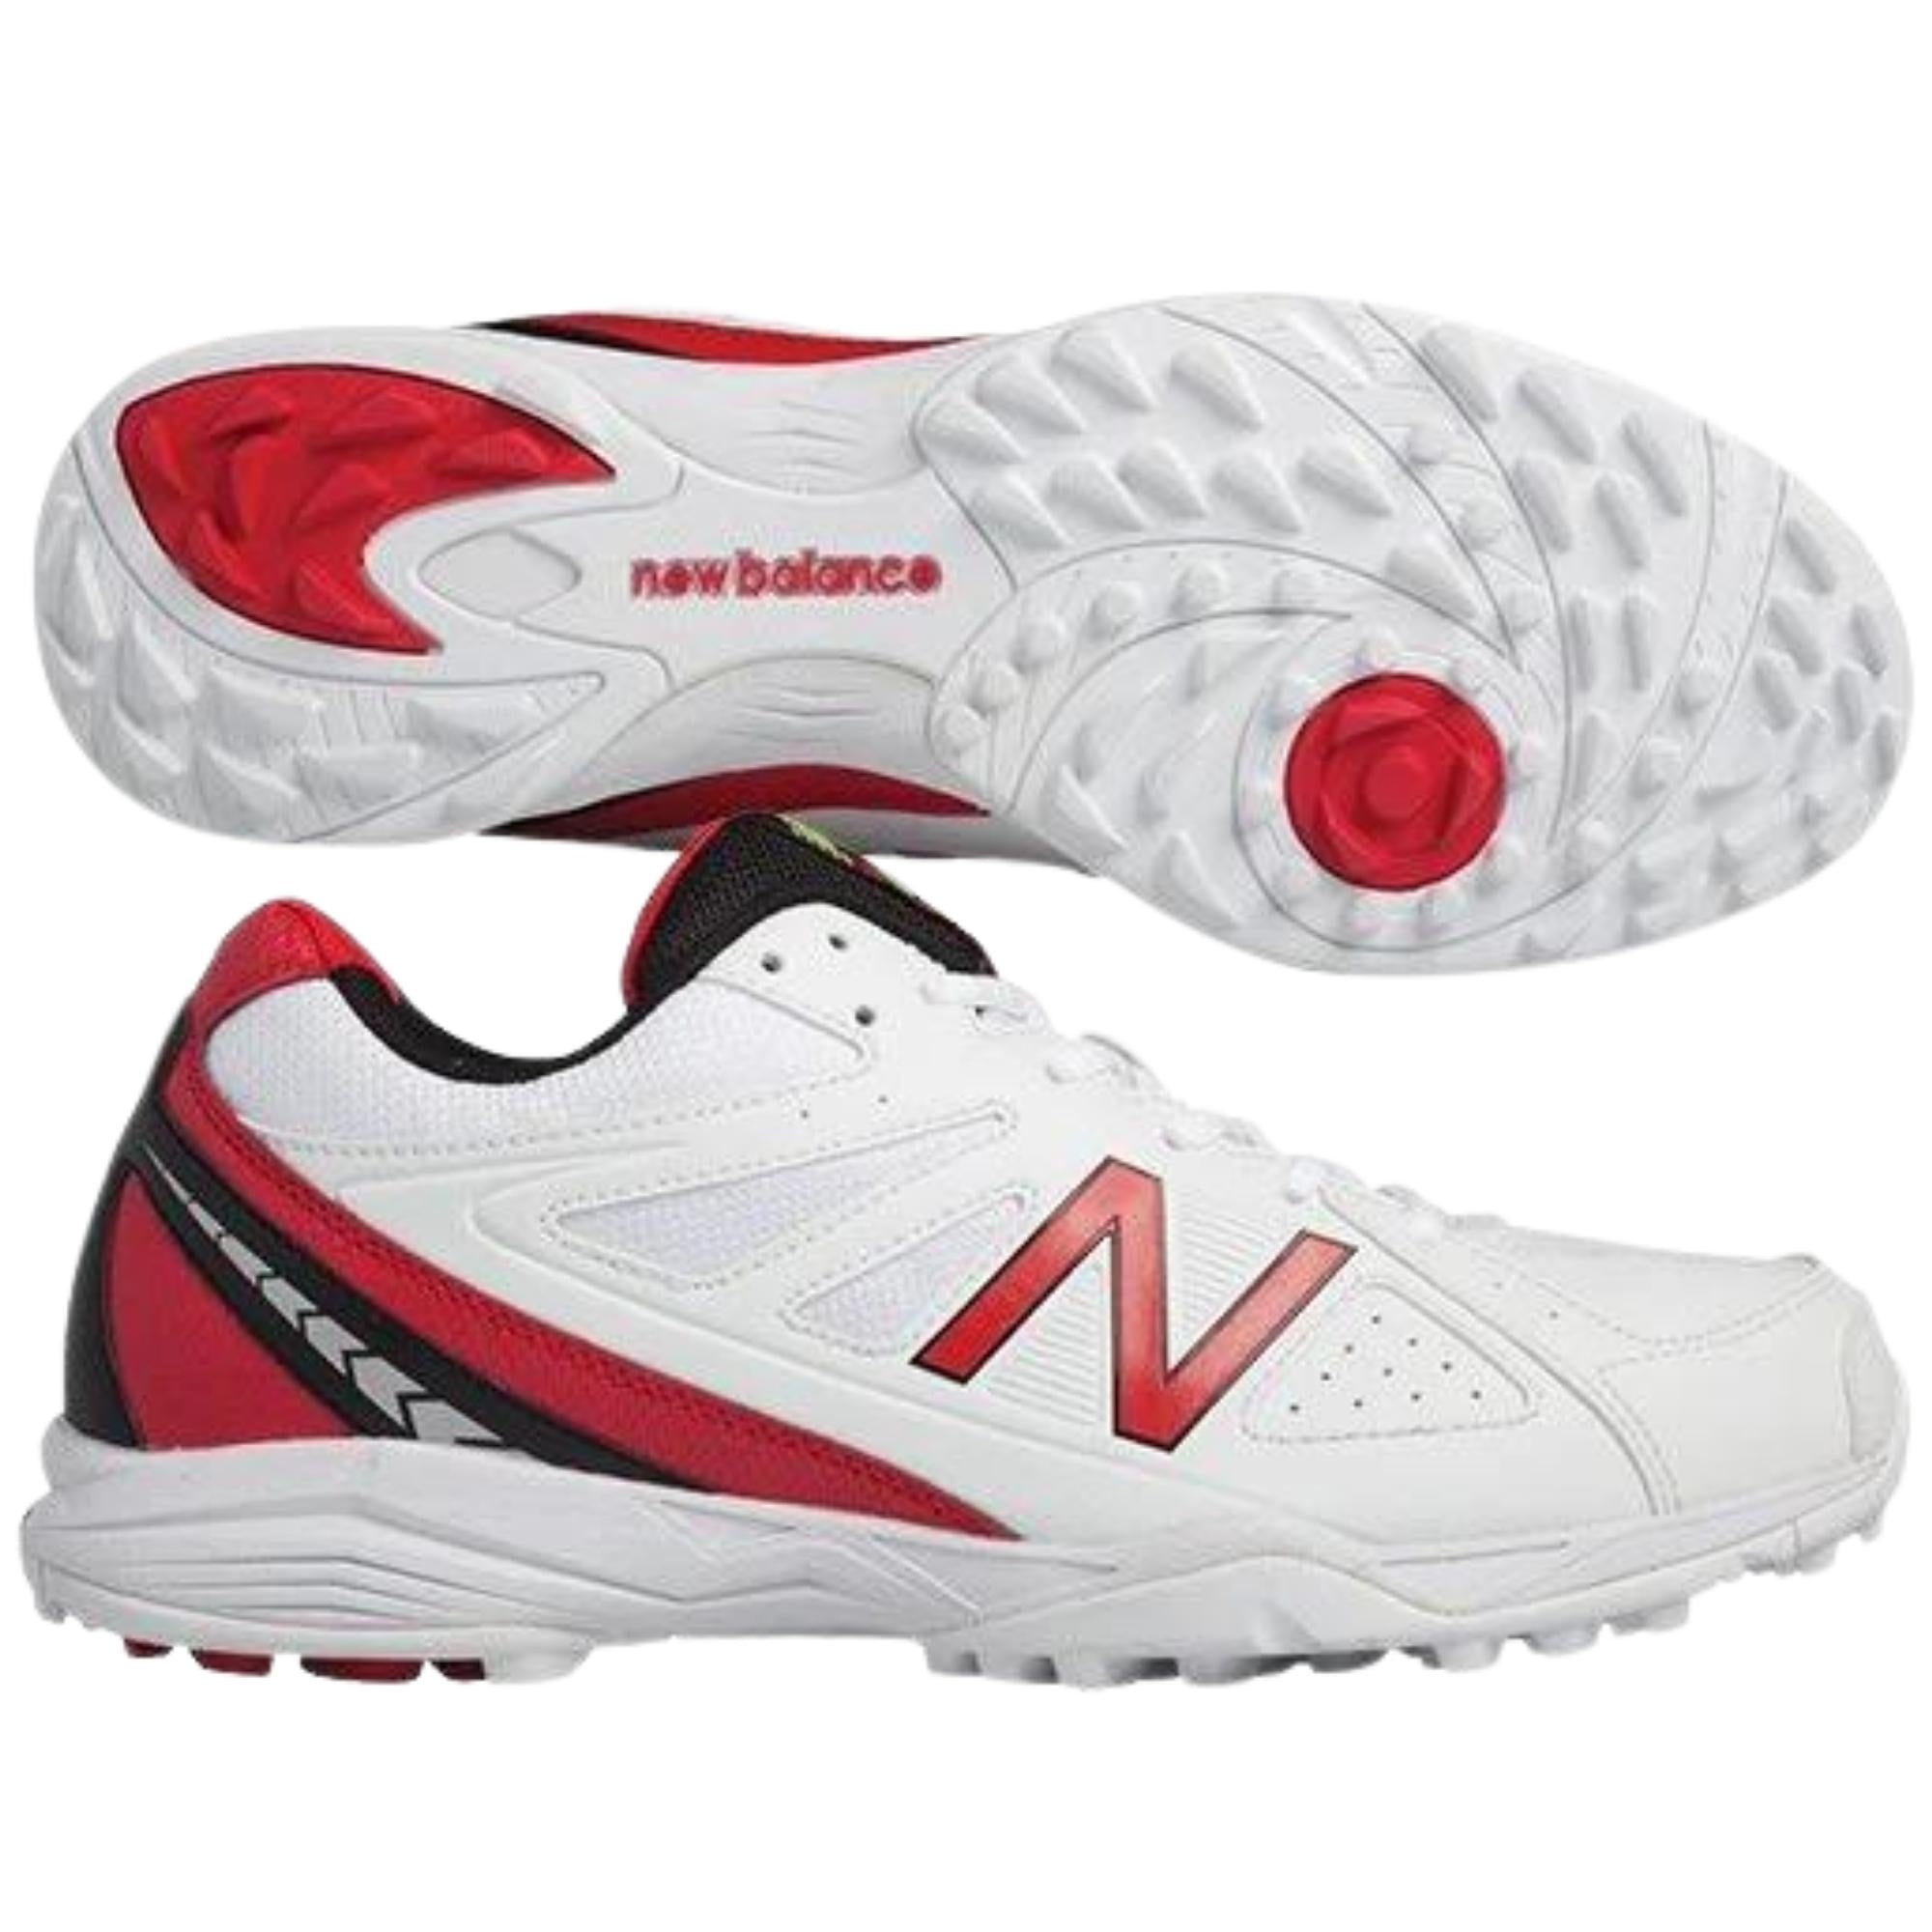 New Balance Cricket Shoes, Model CK4020R2 Rubber Sole Shoe - Red/White